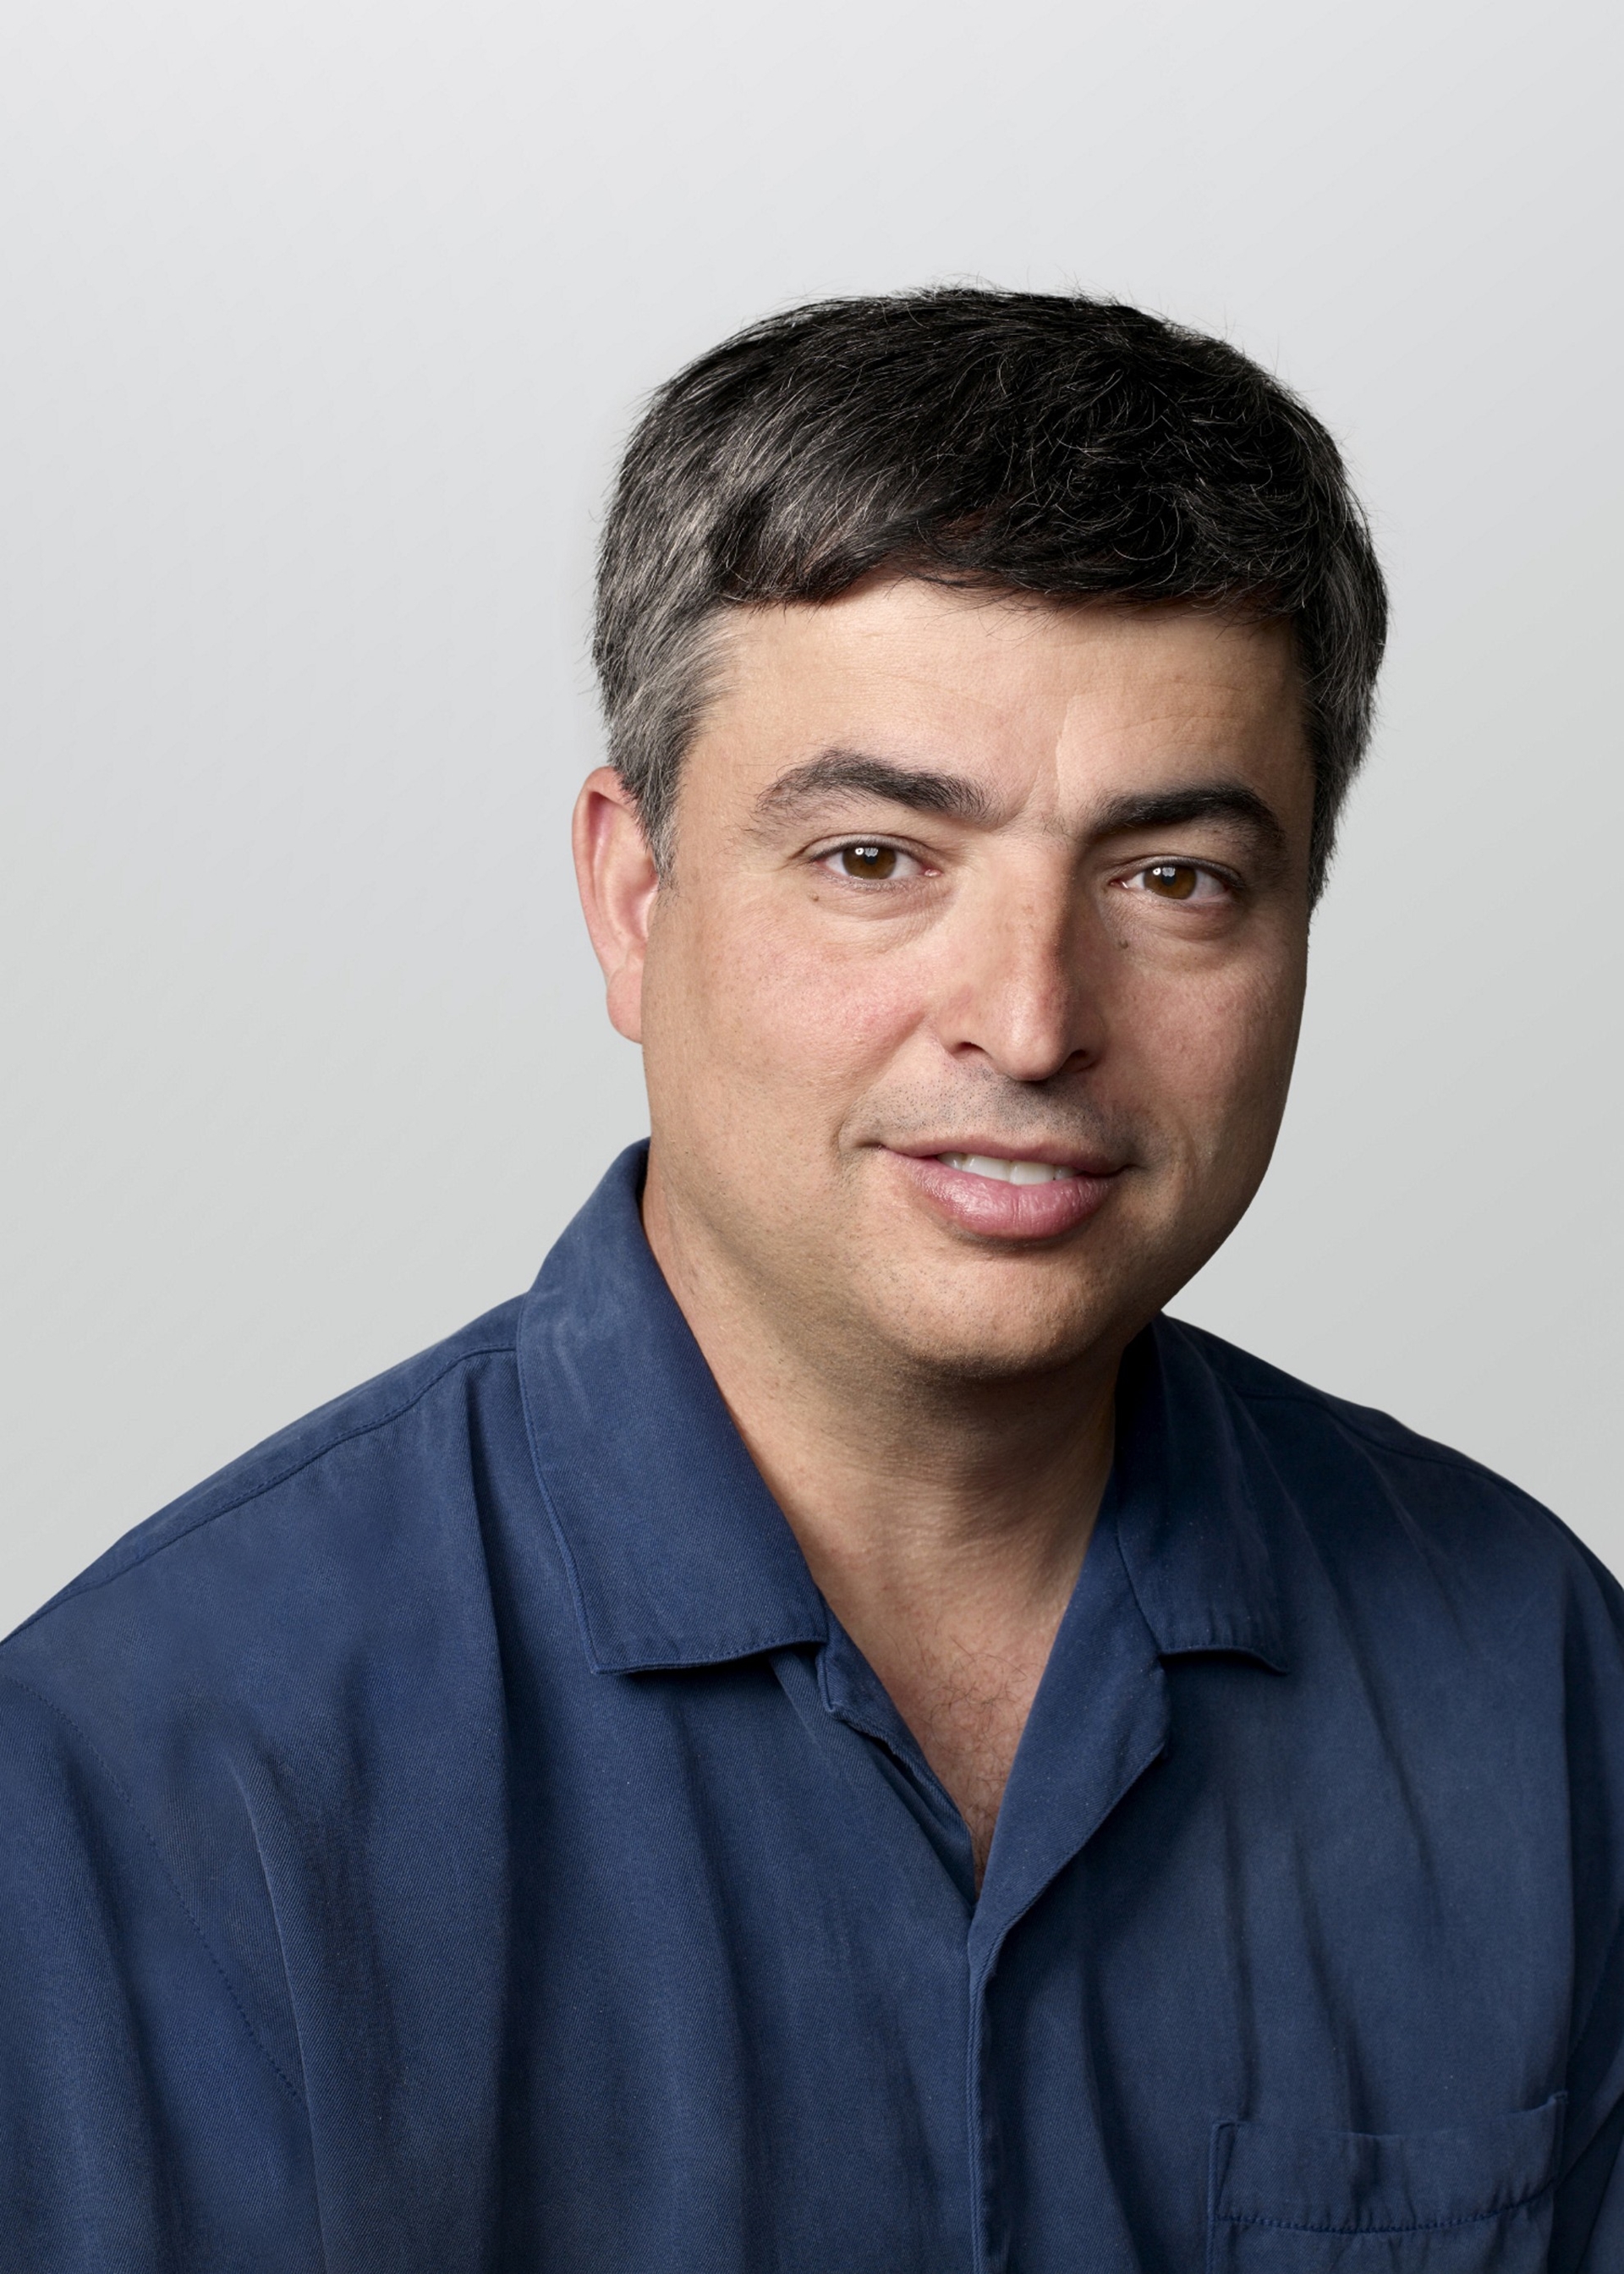 Eddy Cue Apple Senior Vice President Internet Software and Services